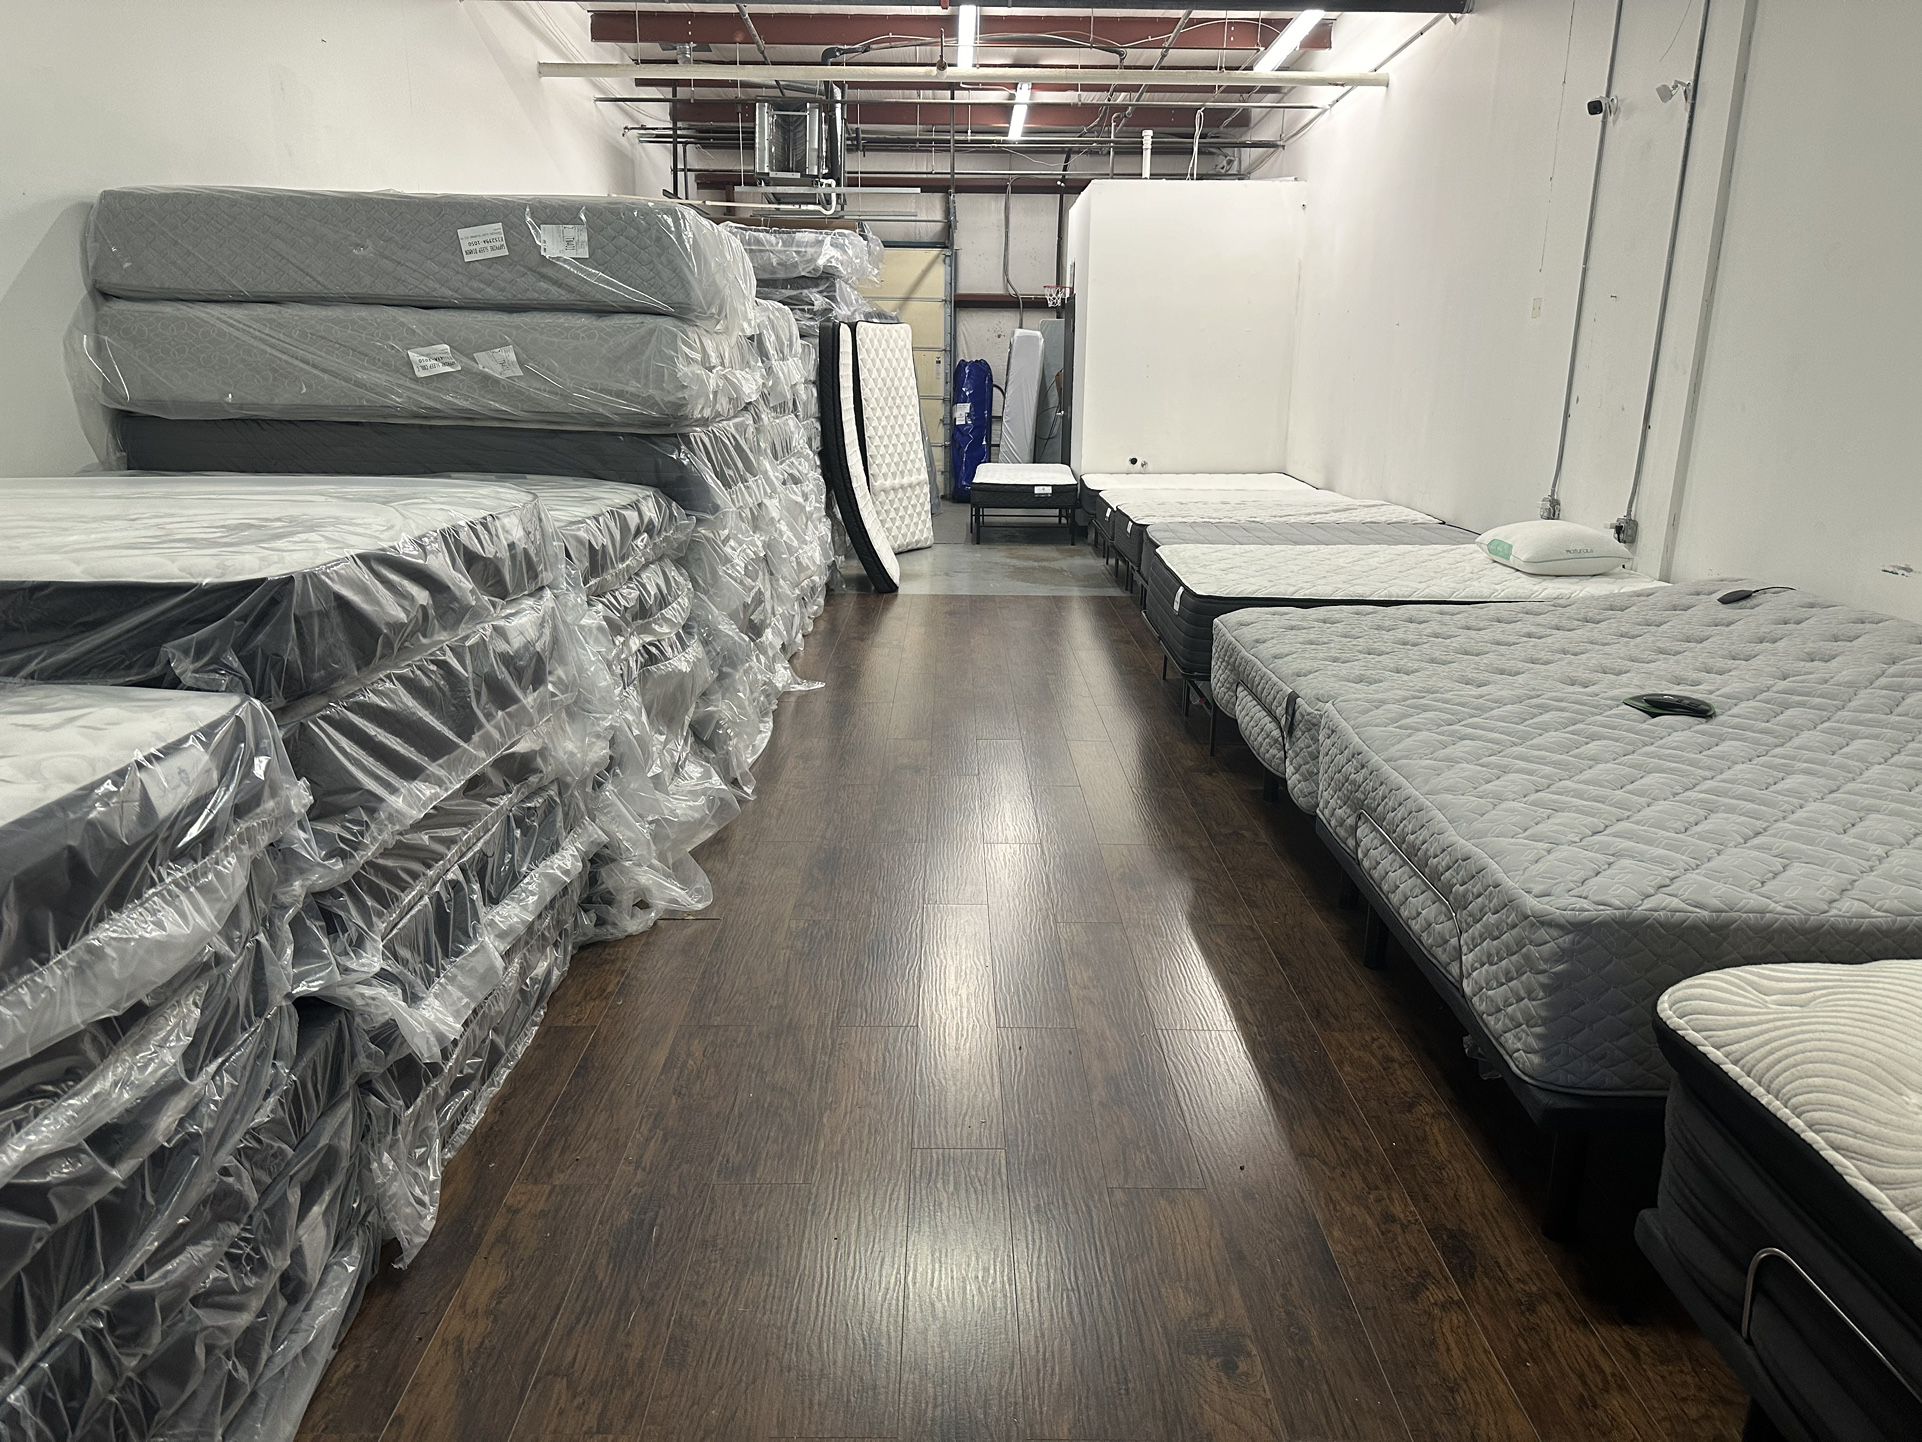 Hurry! Mattresses 30-80% Off While Supplies Last